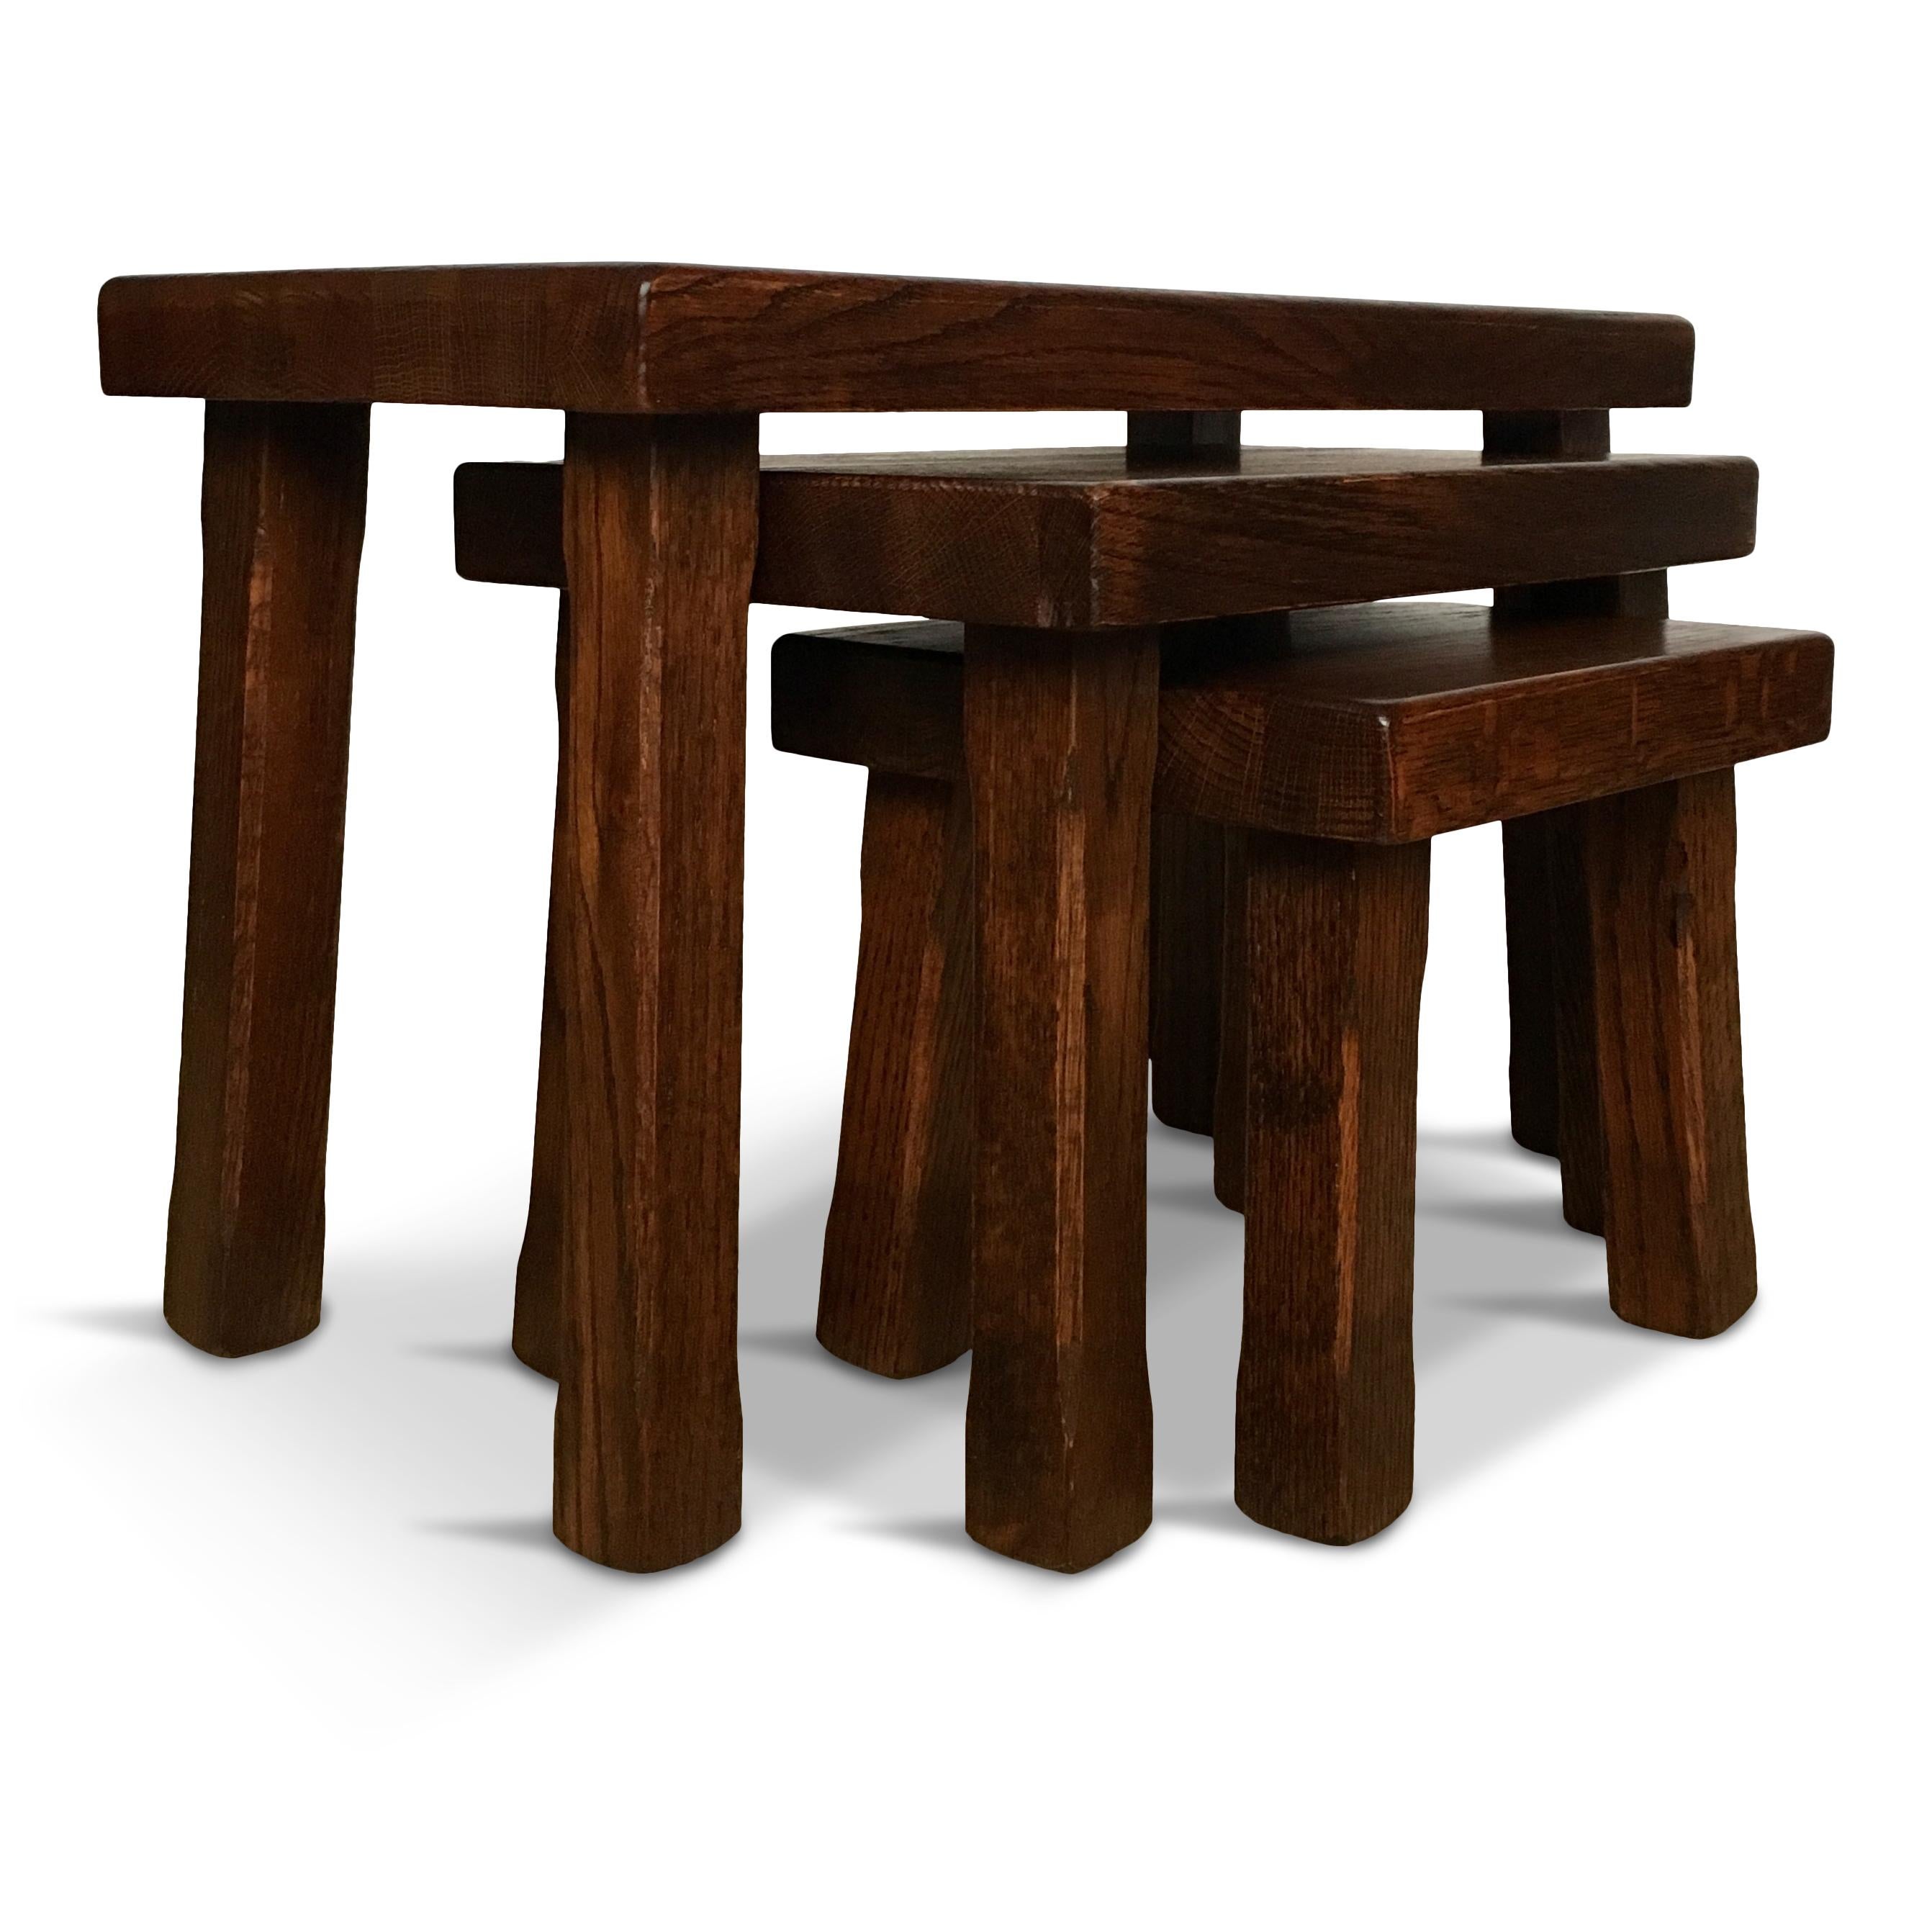 Set of Three Vintage Dutch Solid Oak Nesting Tables or Benches, 1970s For Sale 1